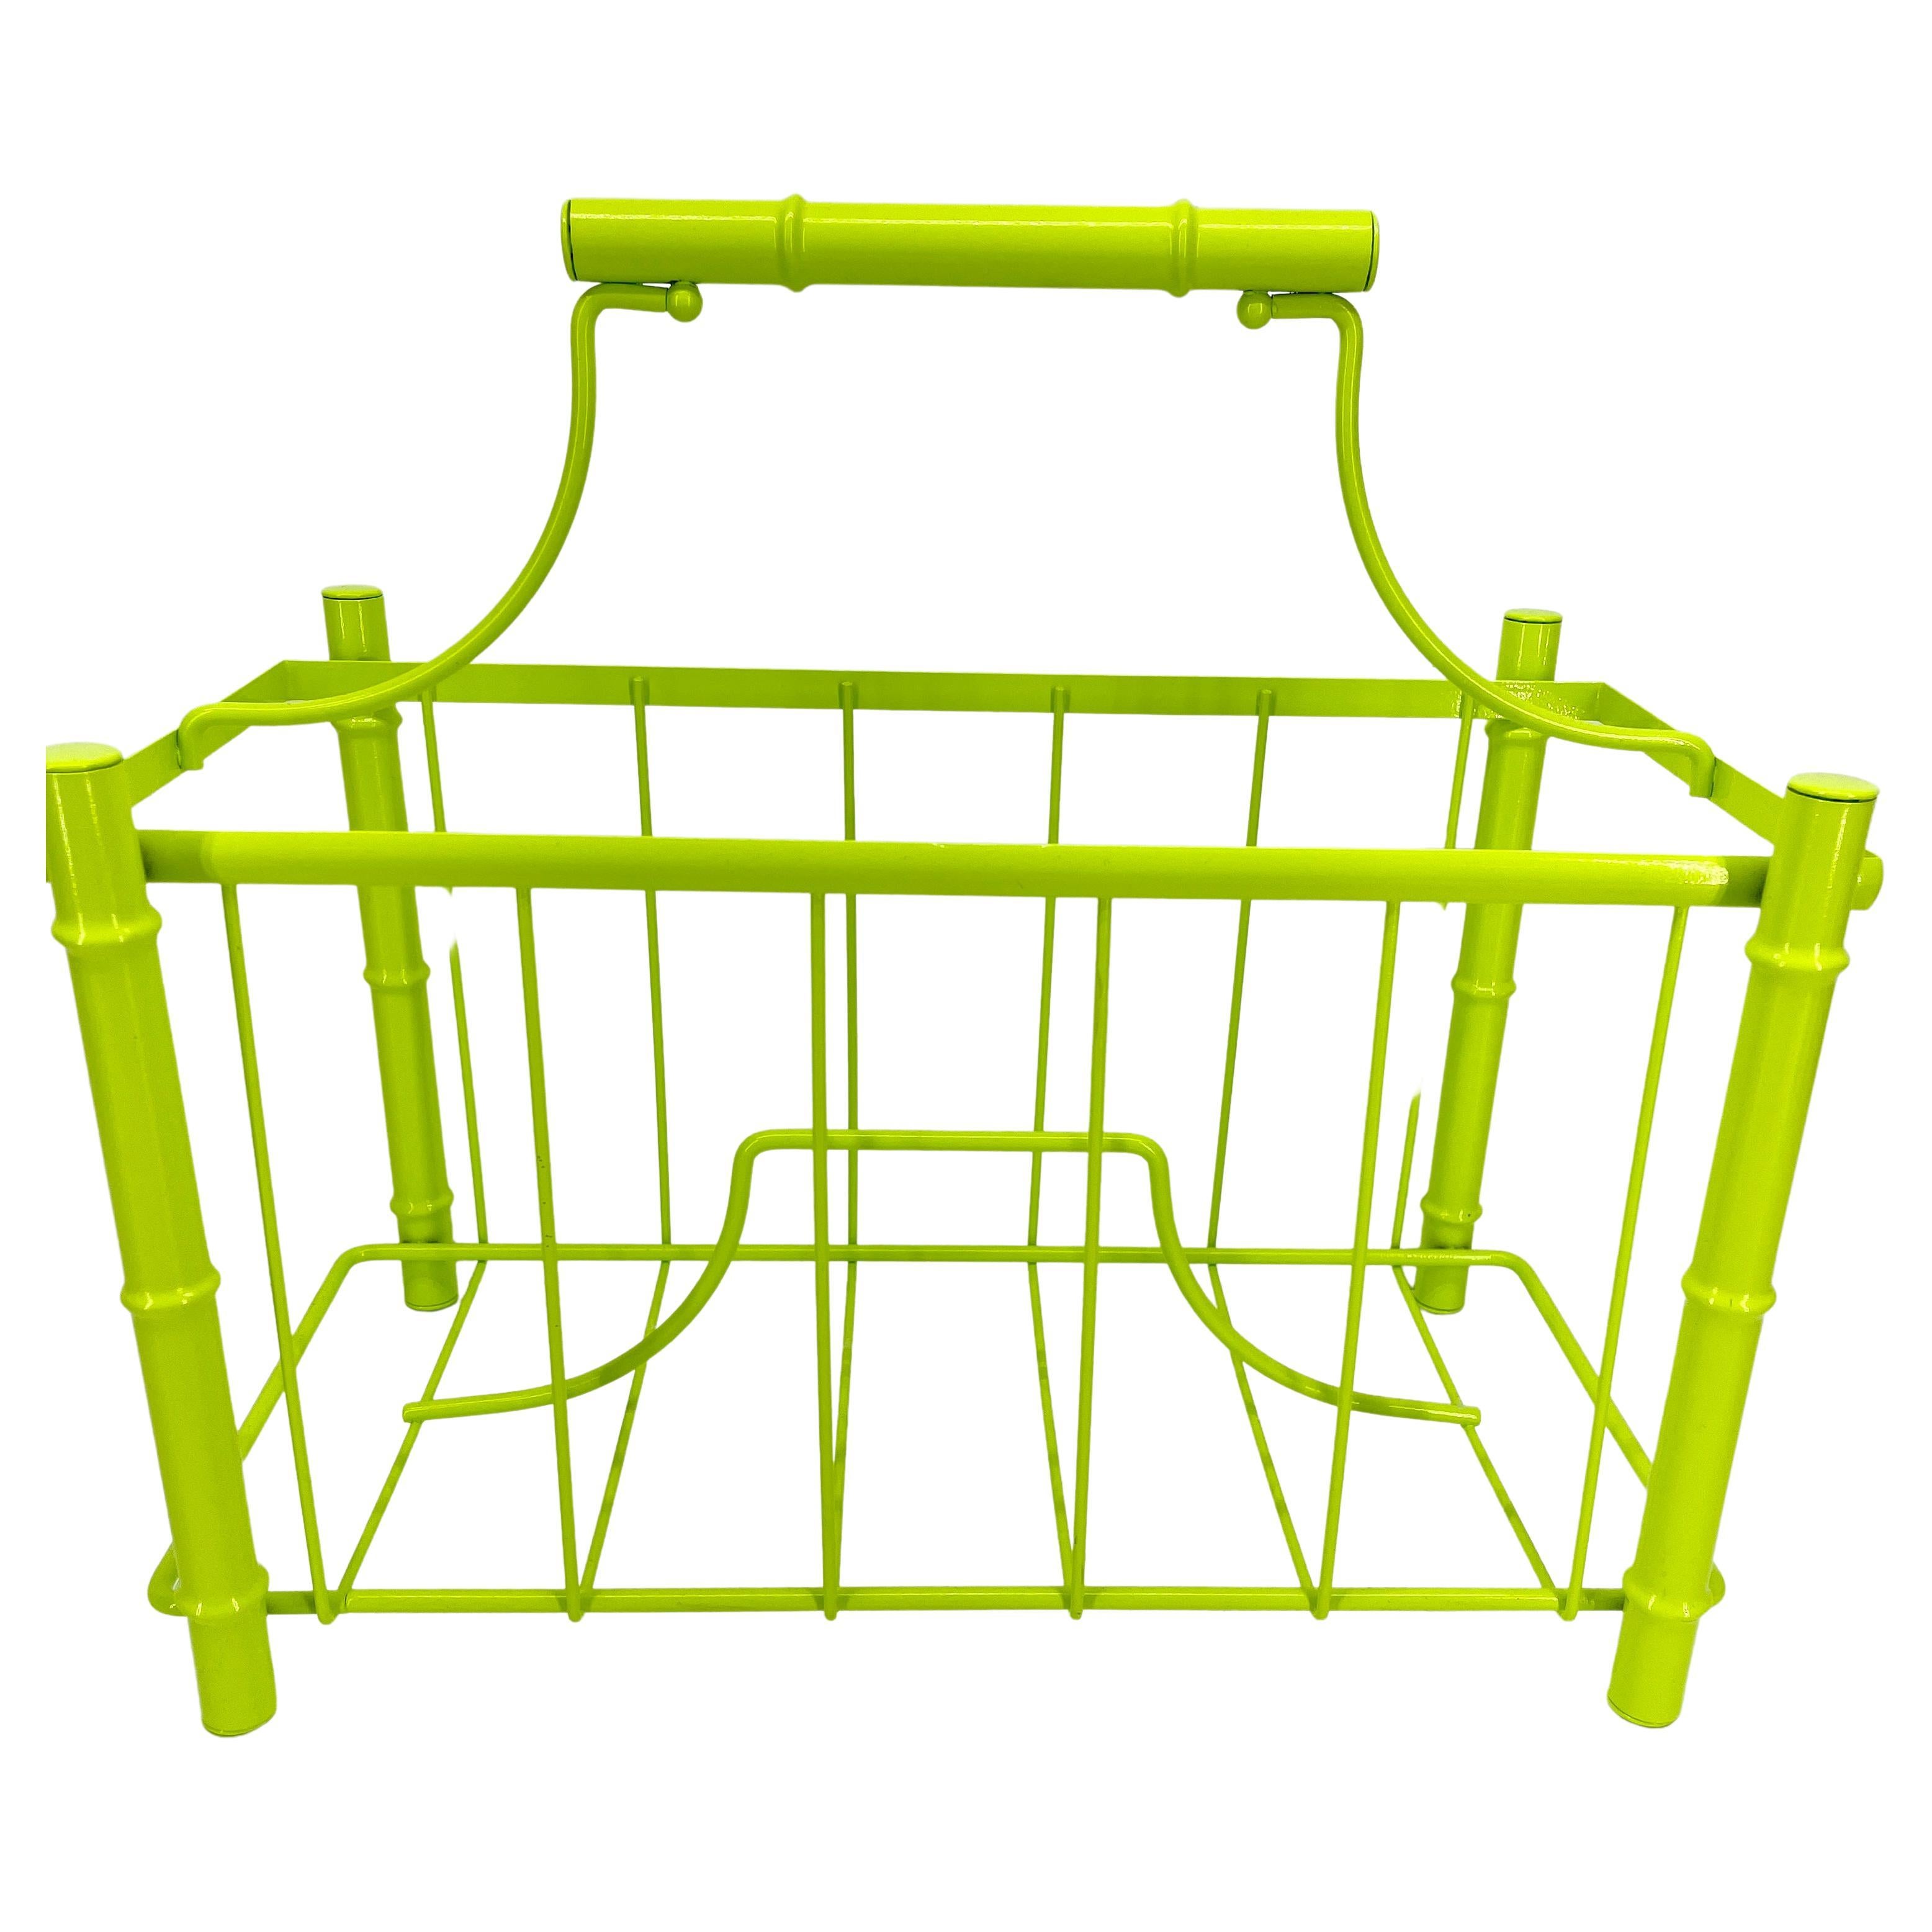 American Mid-Century Modern Faux Bamboo Magazine Rack, Powder Coated Bright Chartreuse For Sale